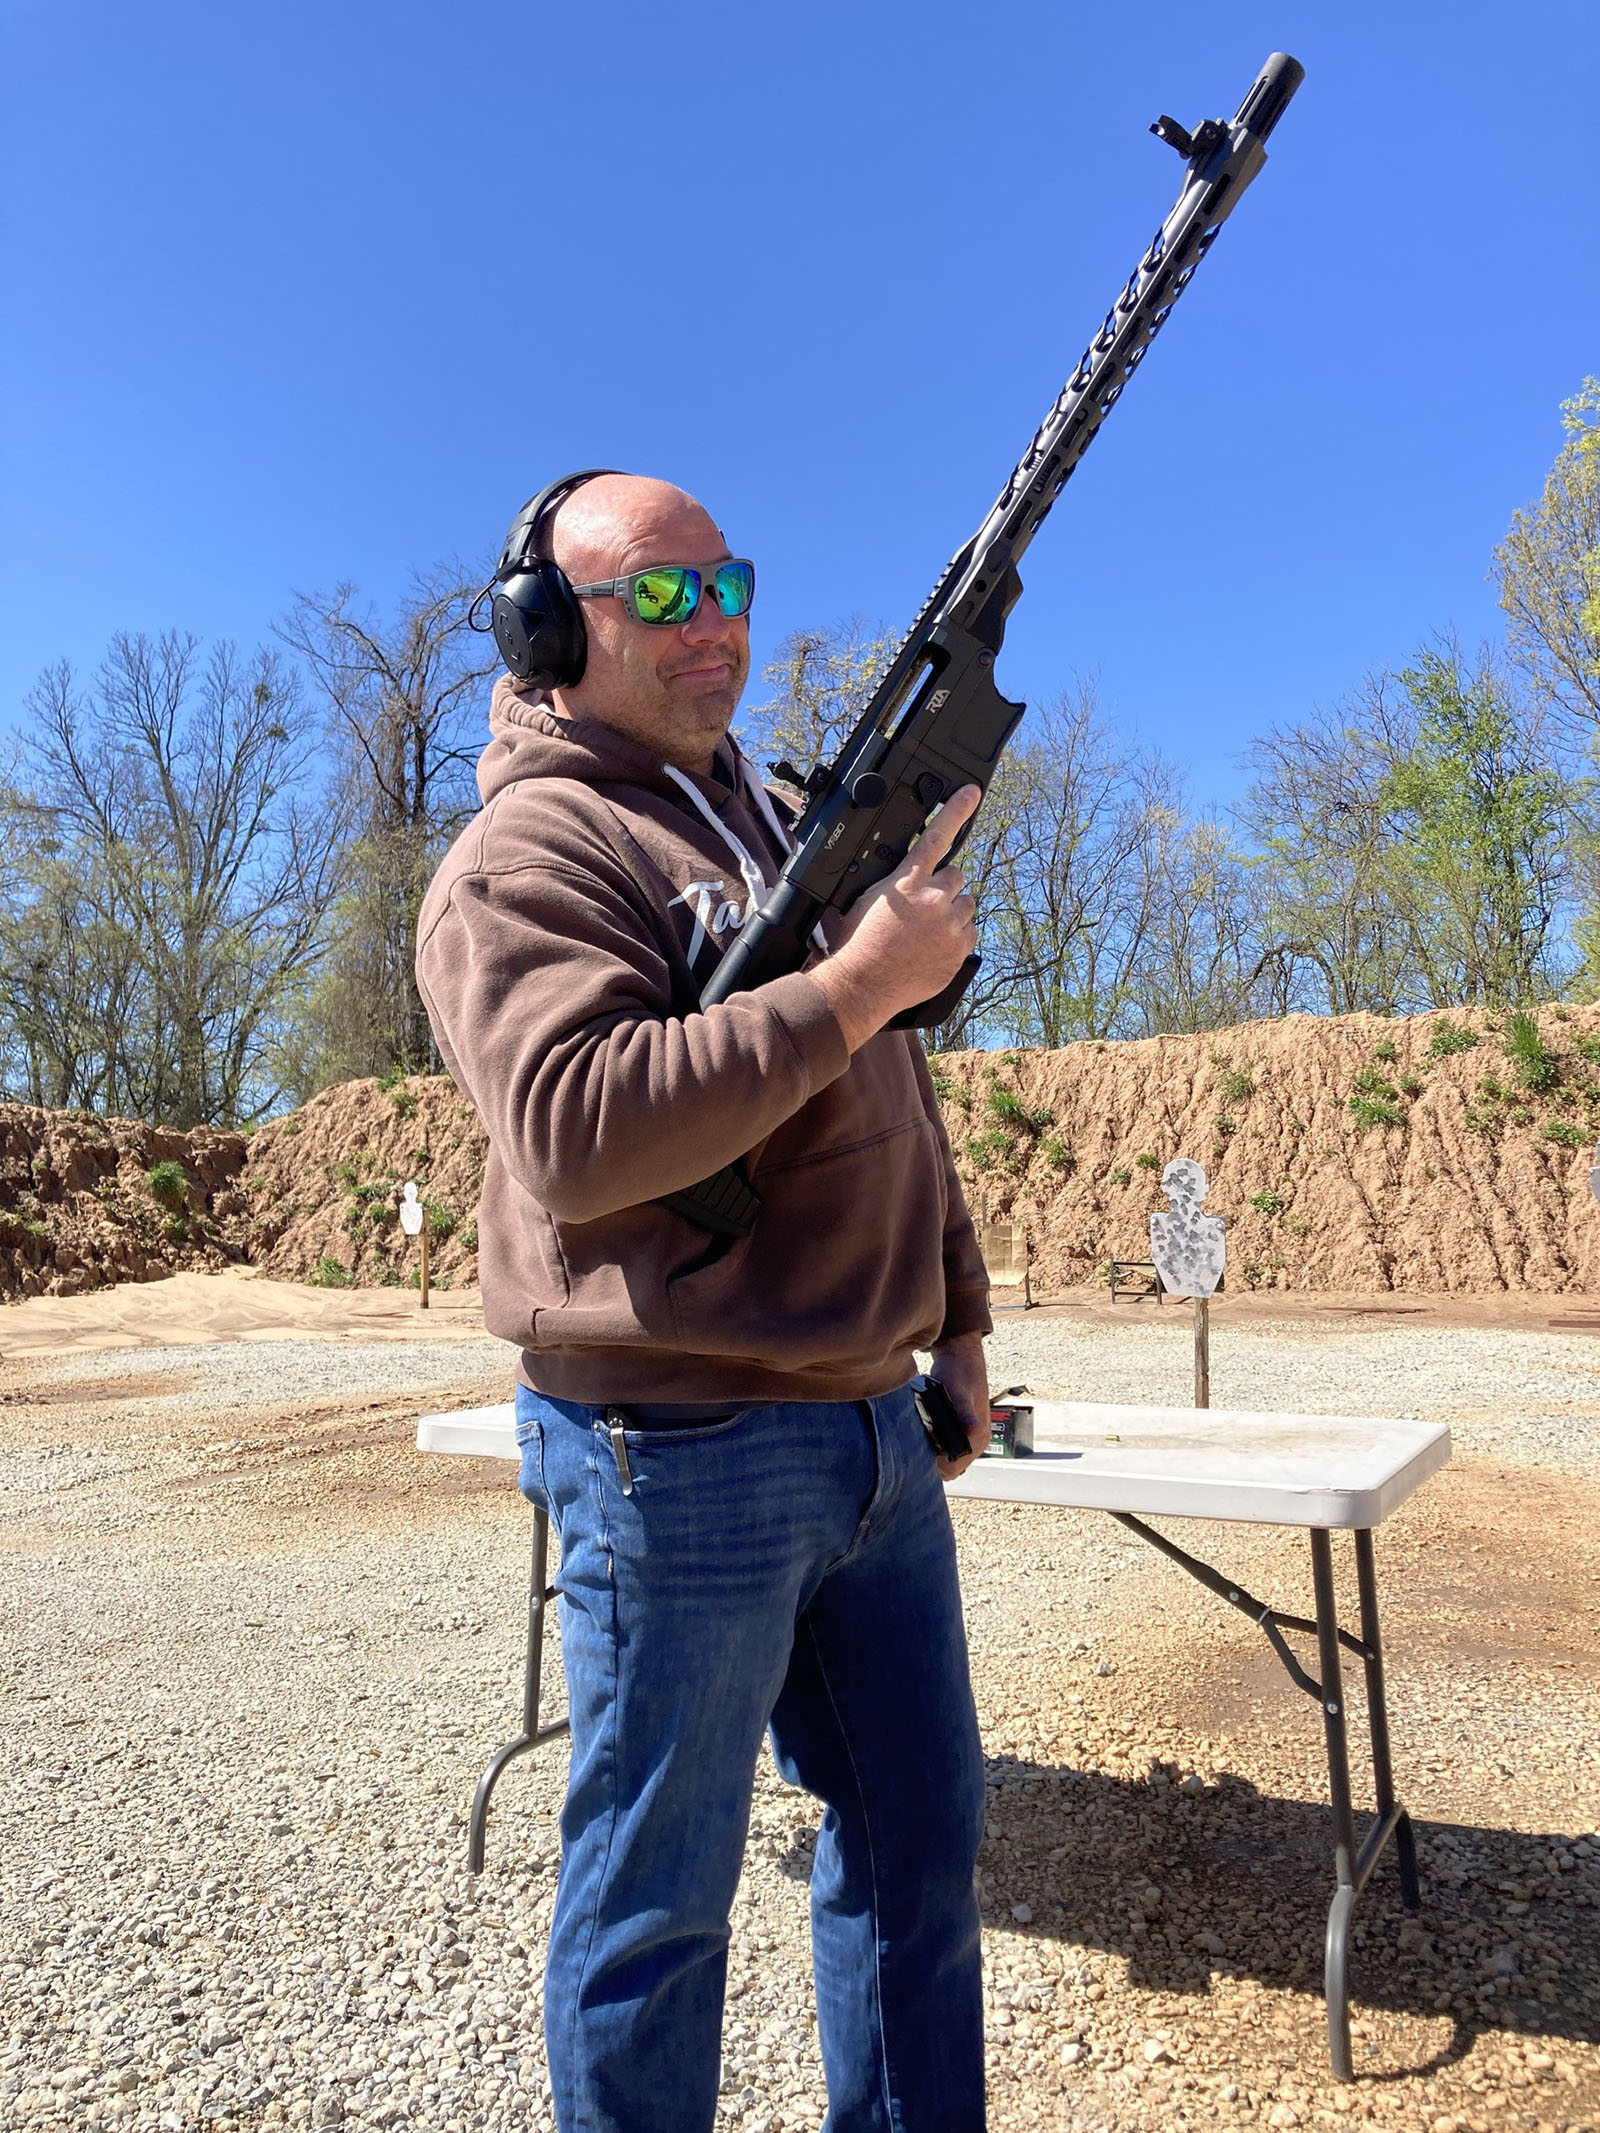 Ringing steel: New shooting range challenges long distance